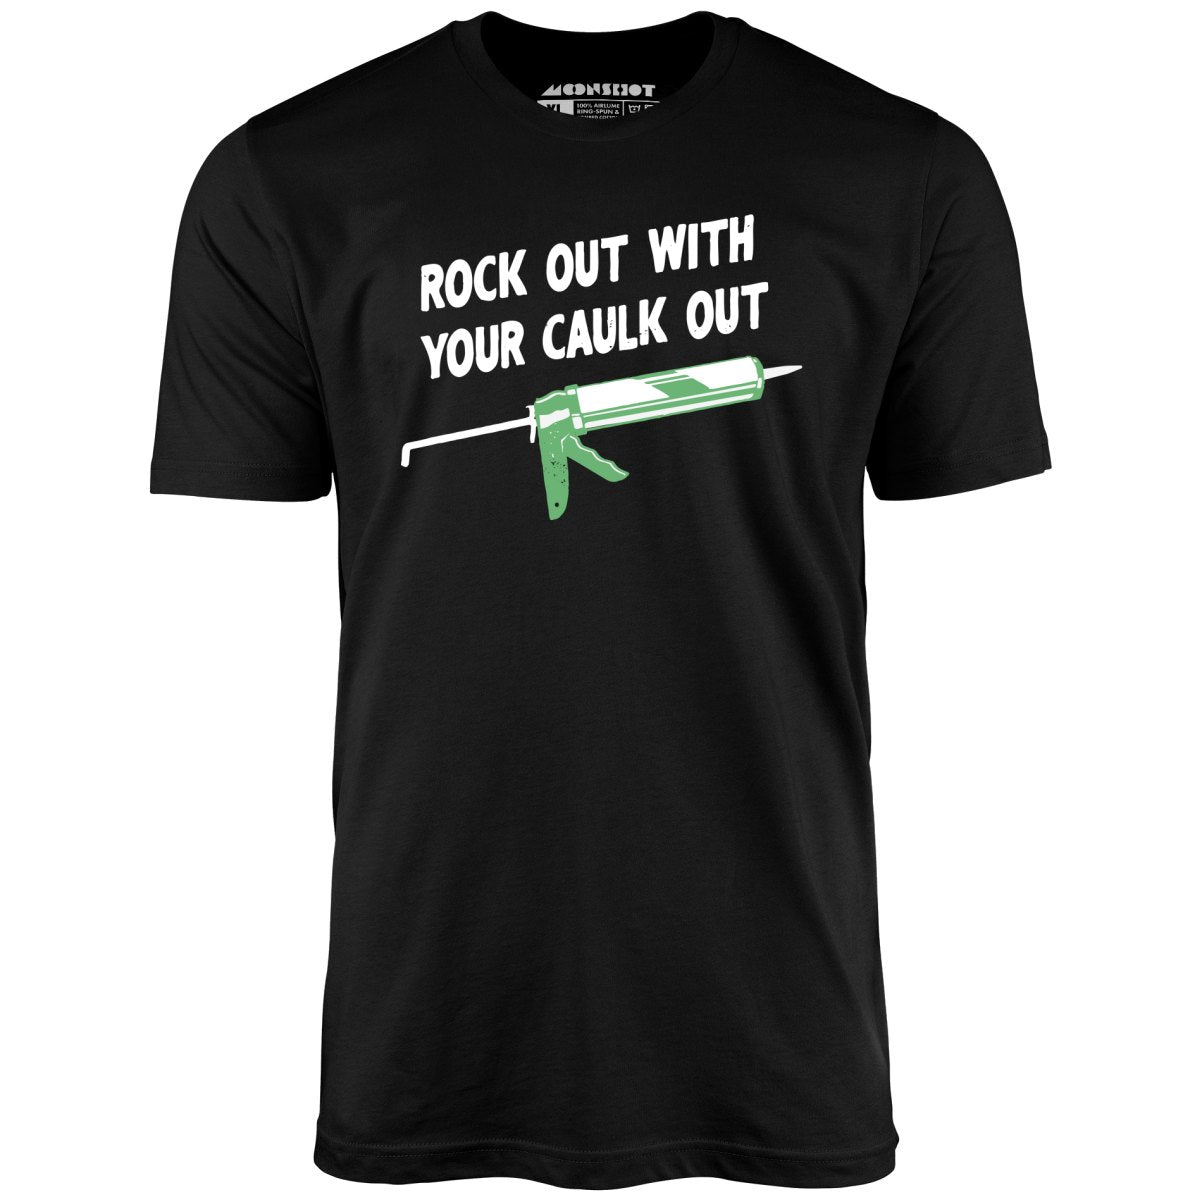 Rock Out With Your Caulk Out - Unisex T-Shirt